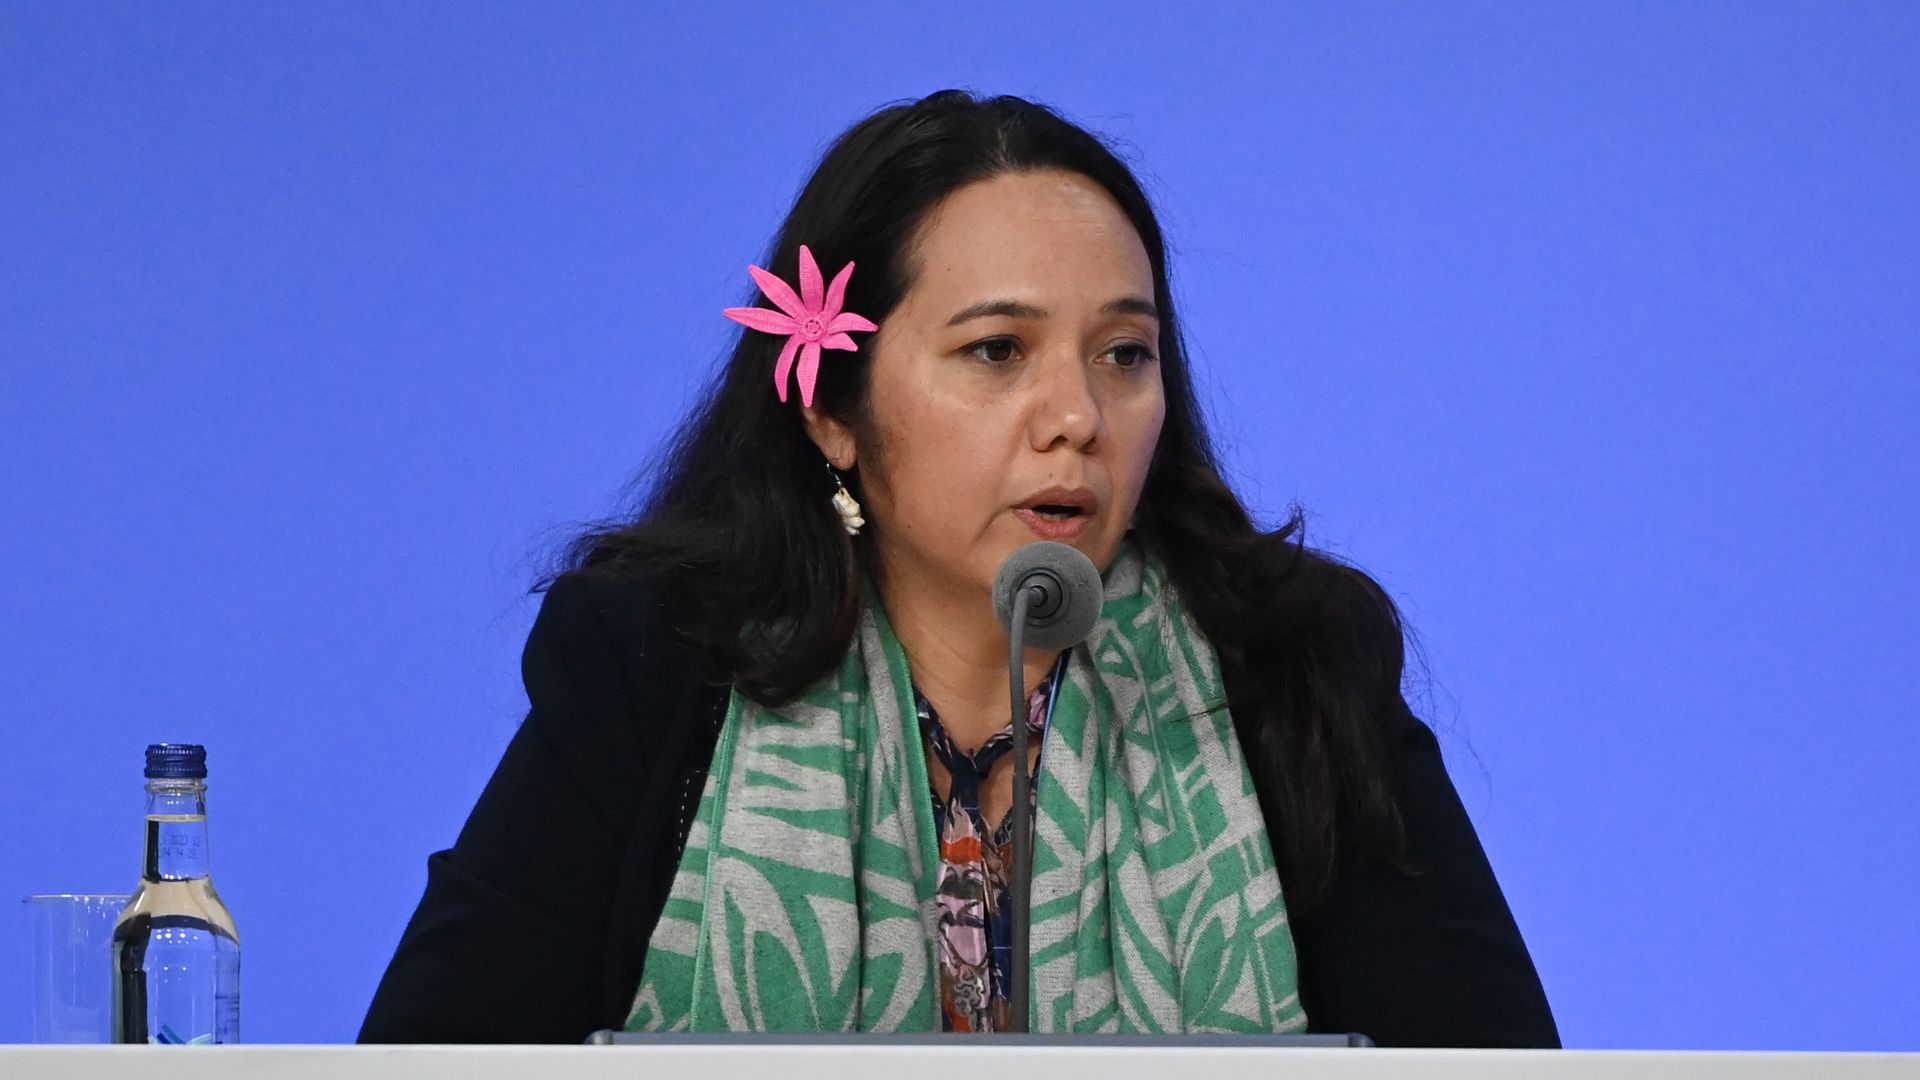 Marshall Islands climate envoy Tina Stege seen at COP26.